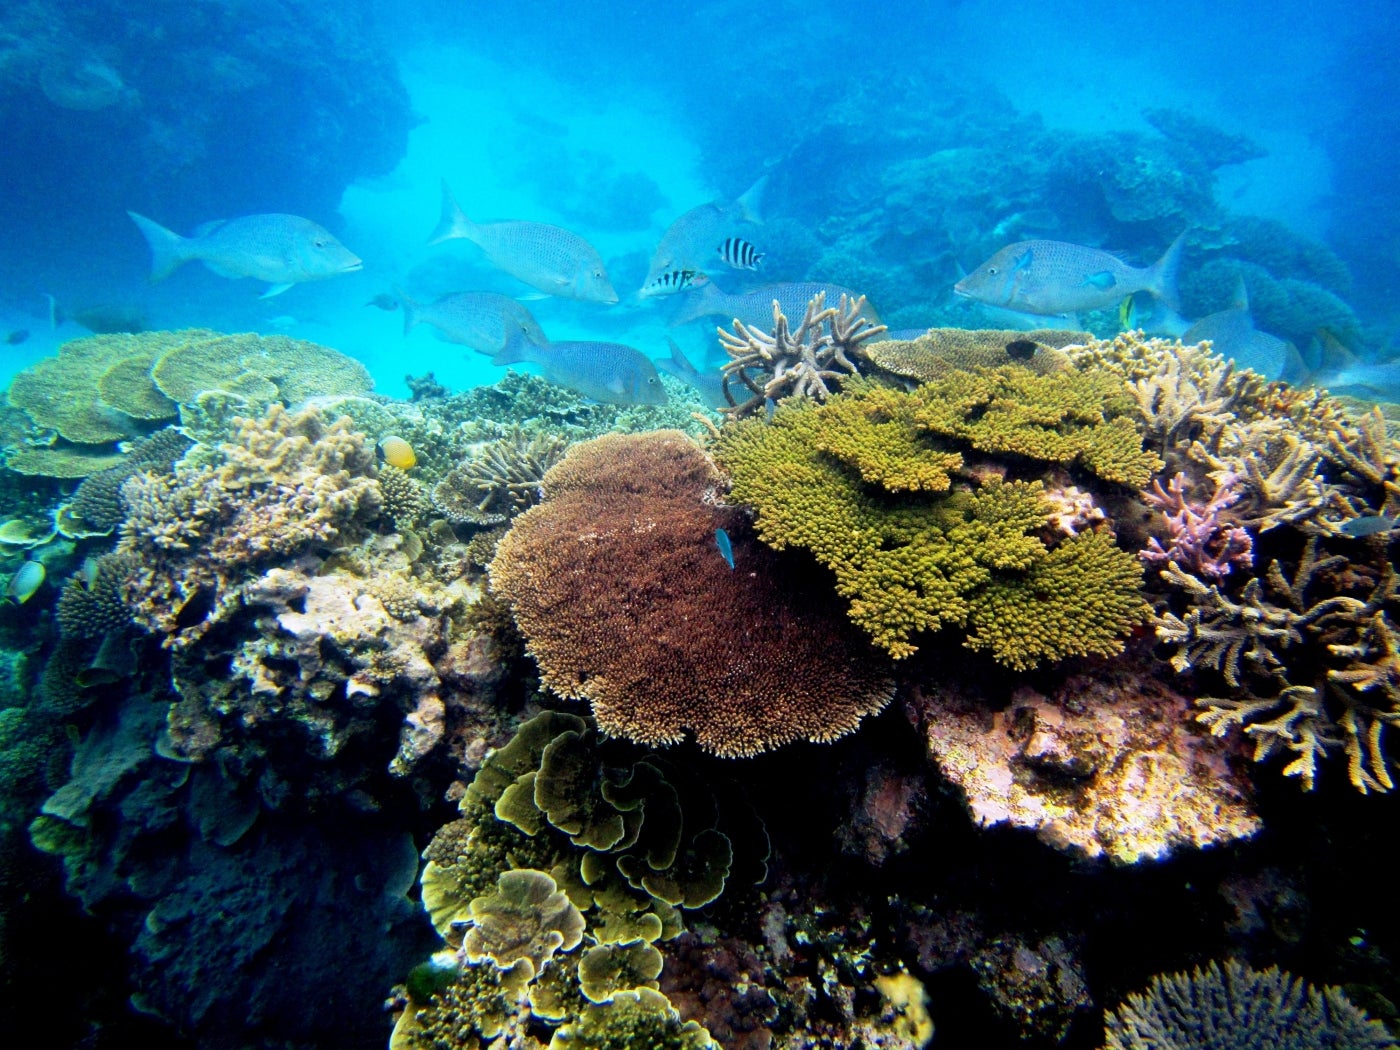 An underwater photo of the Great Barrier Reef. Different types and colors of coral form the reef and large fish can be seen swimming in the water behind them.